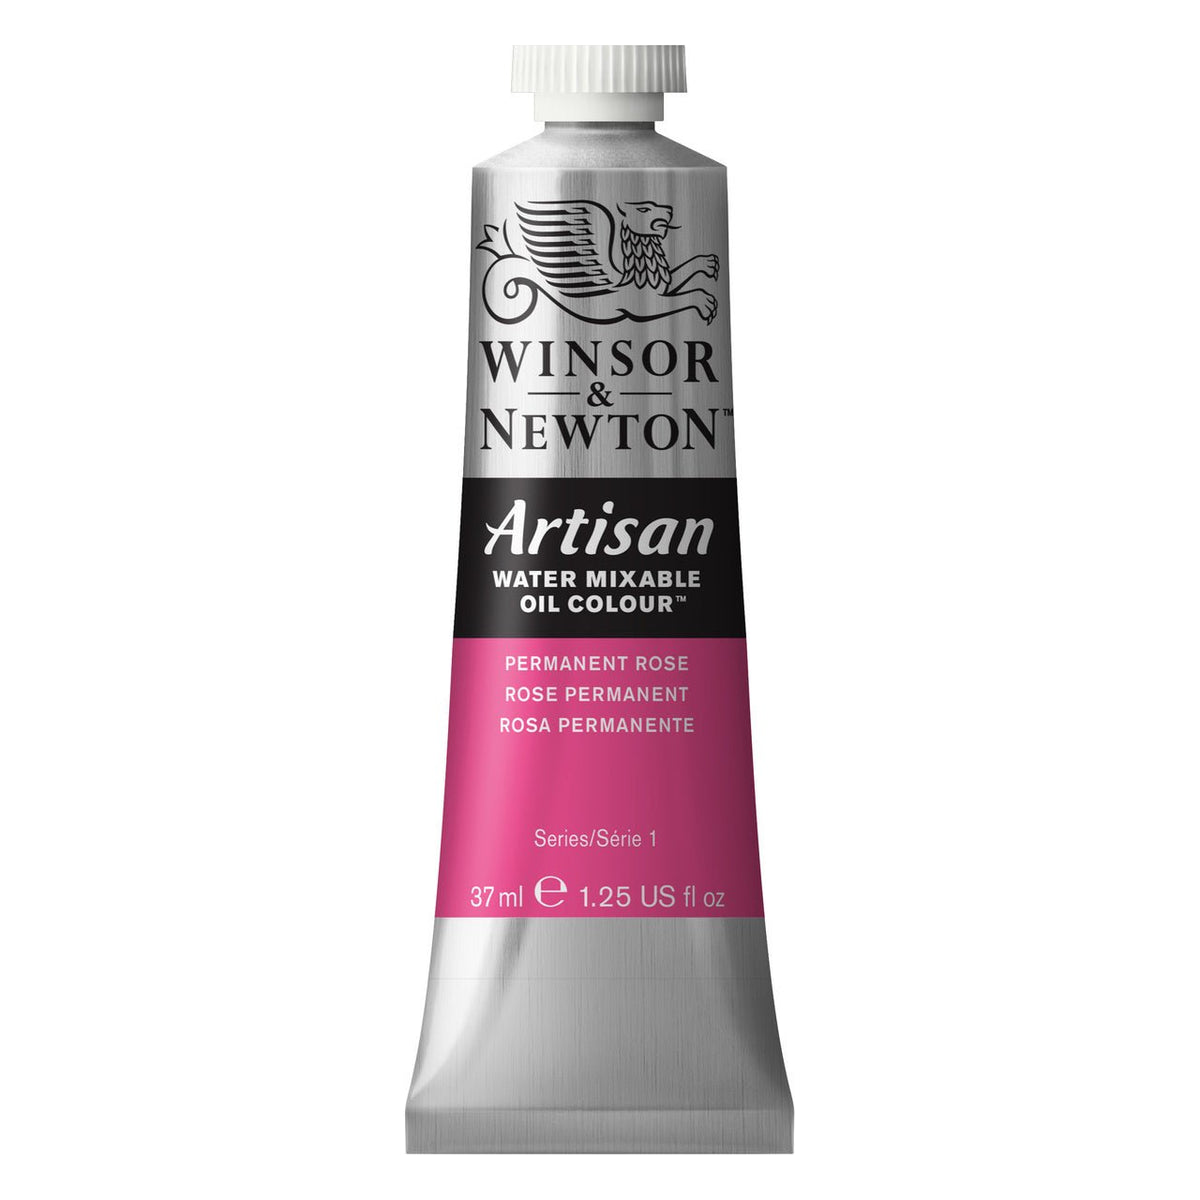 Winsor & Newton Artisan Water Mixable Oil 37ml - Permanent Rose - merriartist.com